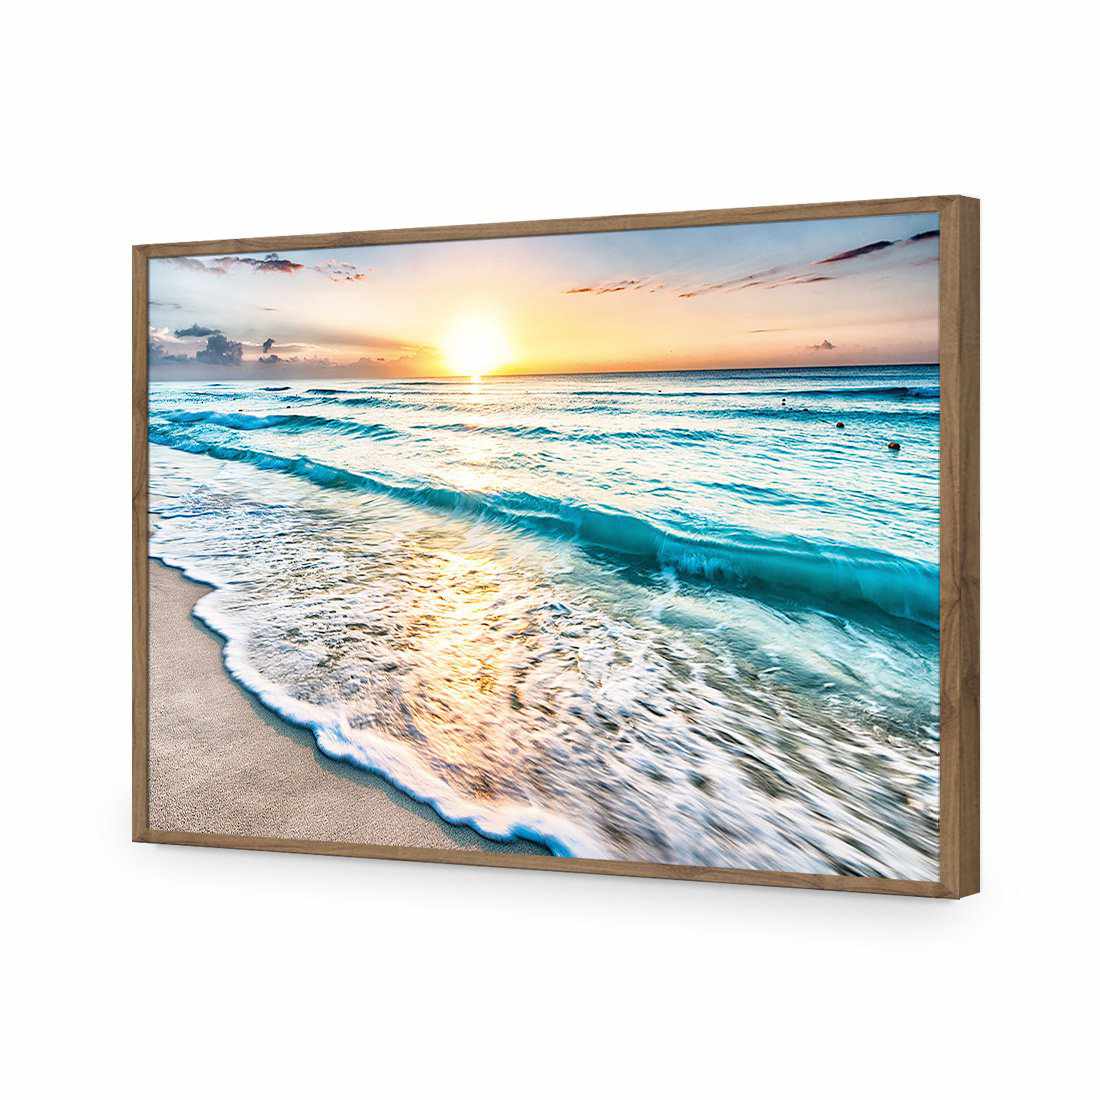 Glimmering Sunrise-Acrylic-Wall Art Design-Without Border-Acrylic - Natural Frame-45x30cm-Wall Art Designs